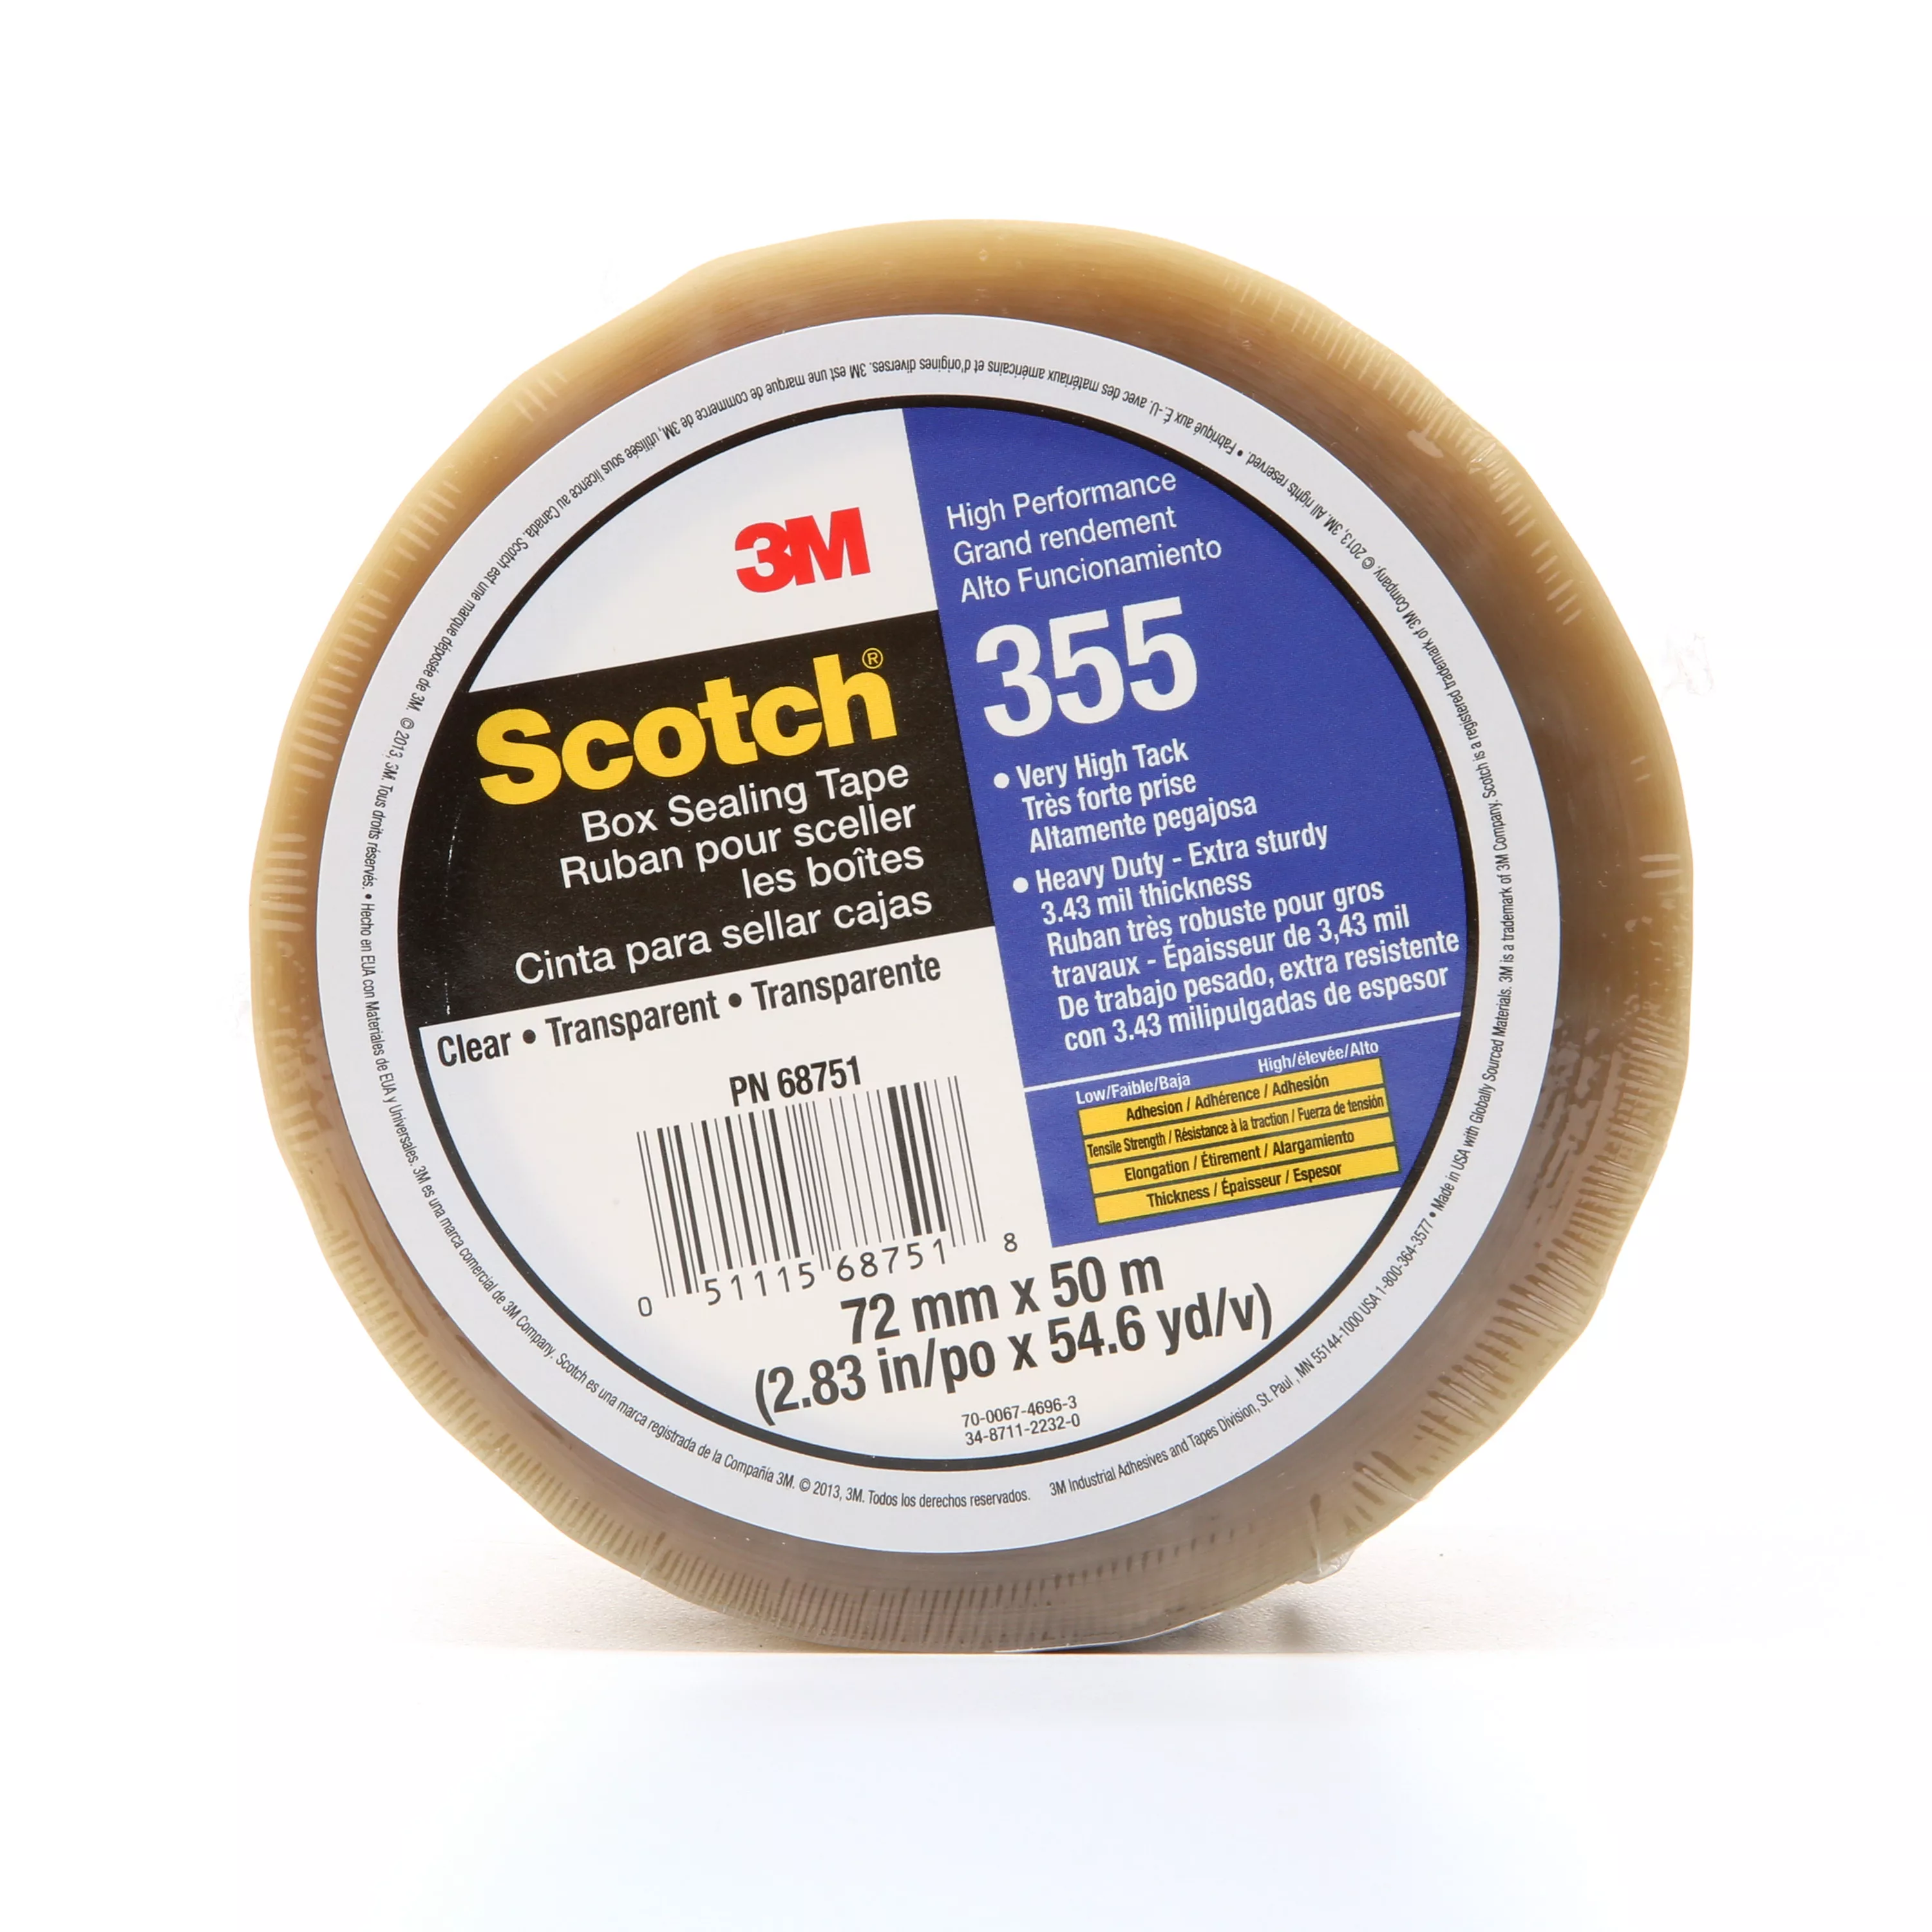 Scotch® Box Sealing Tape 355, Clear, 72 mm x 50 m, 24/Case, Individually
Wrapped Conveniently Packaged